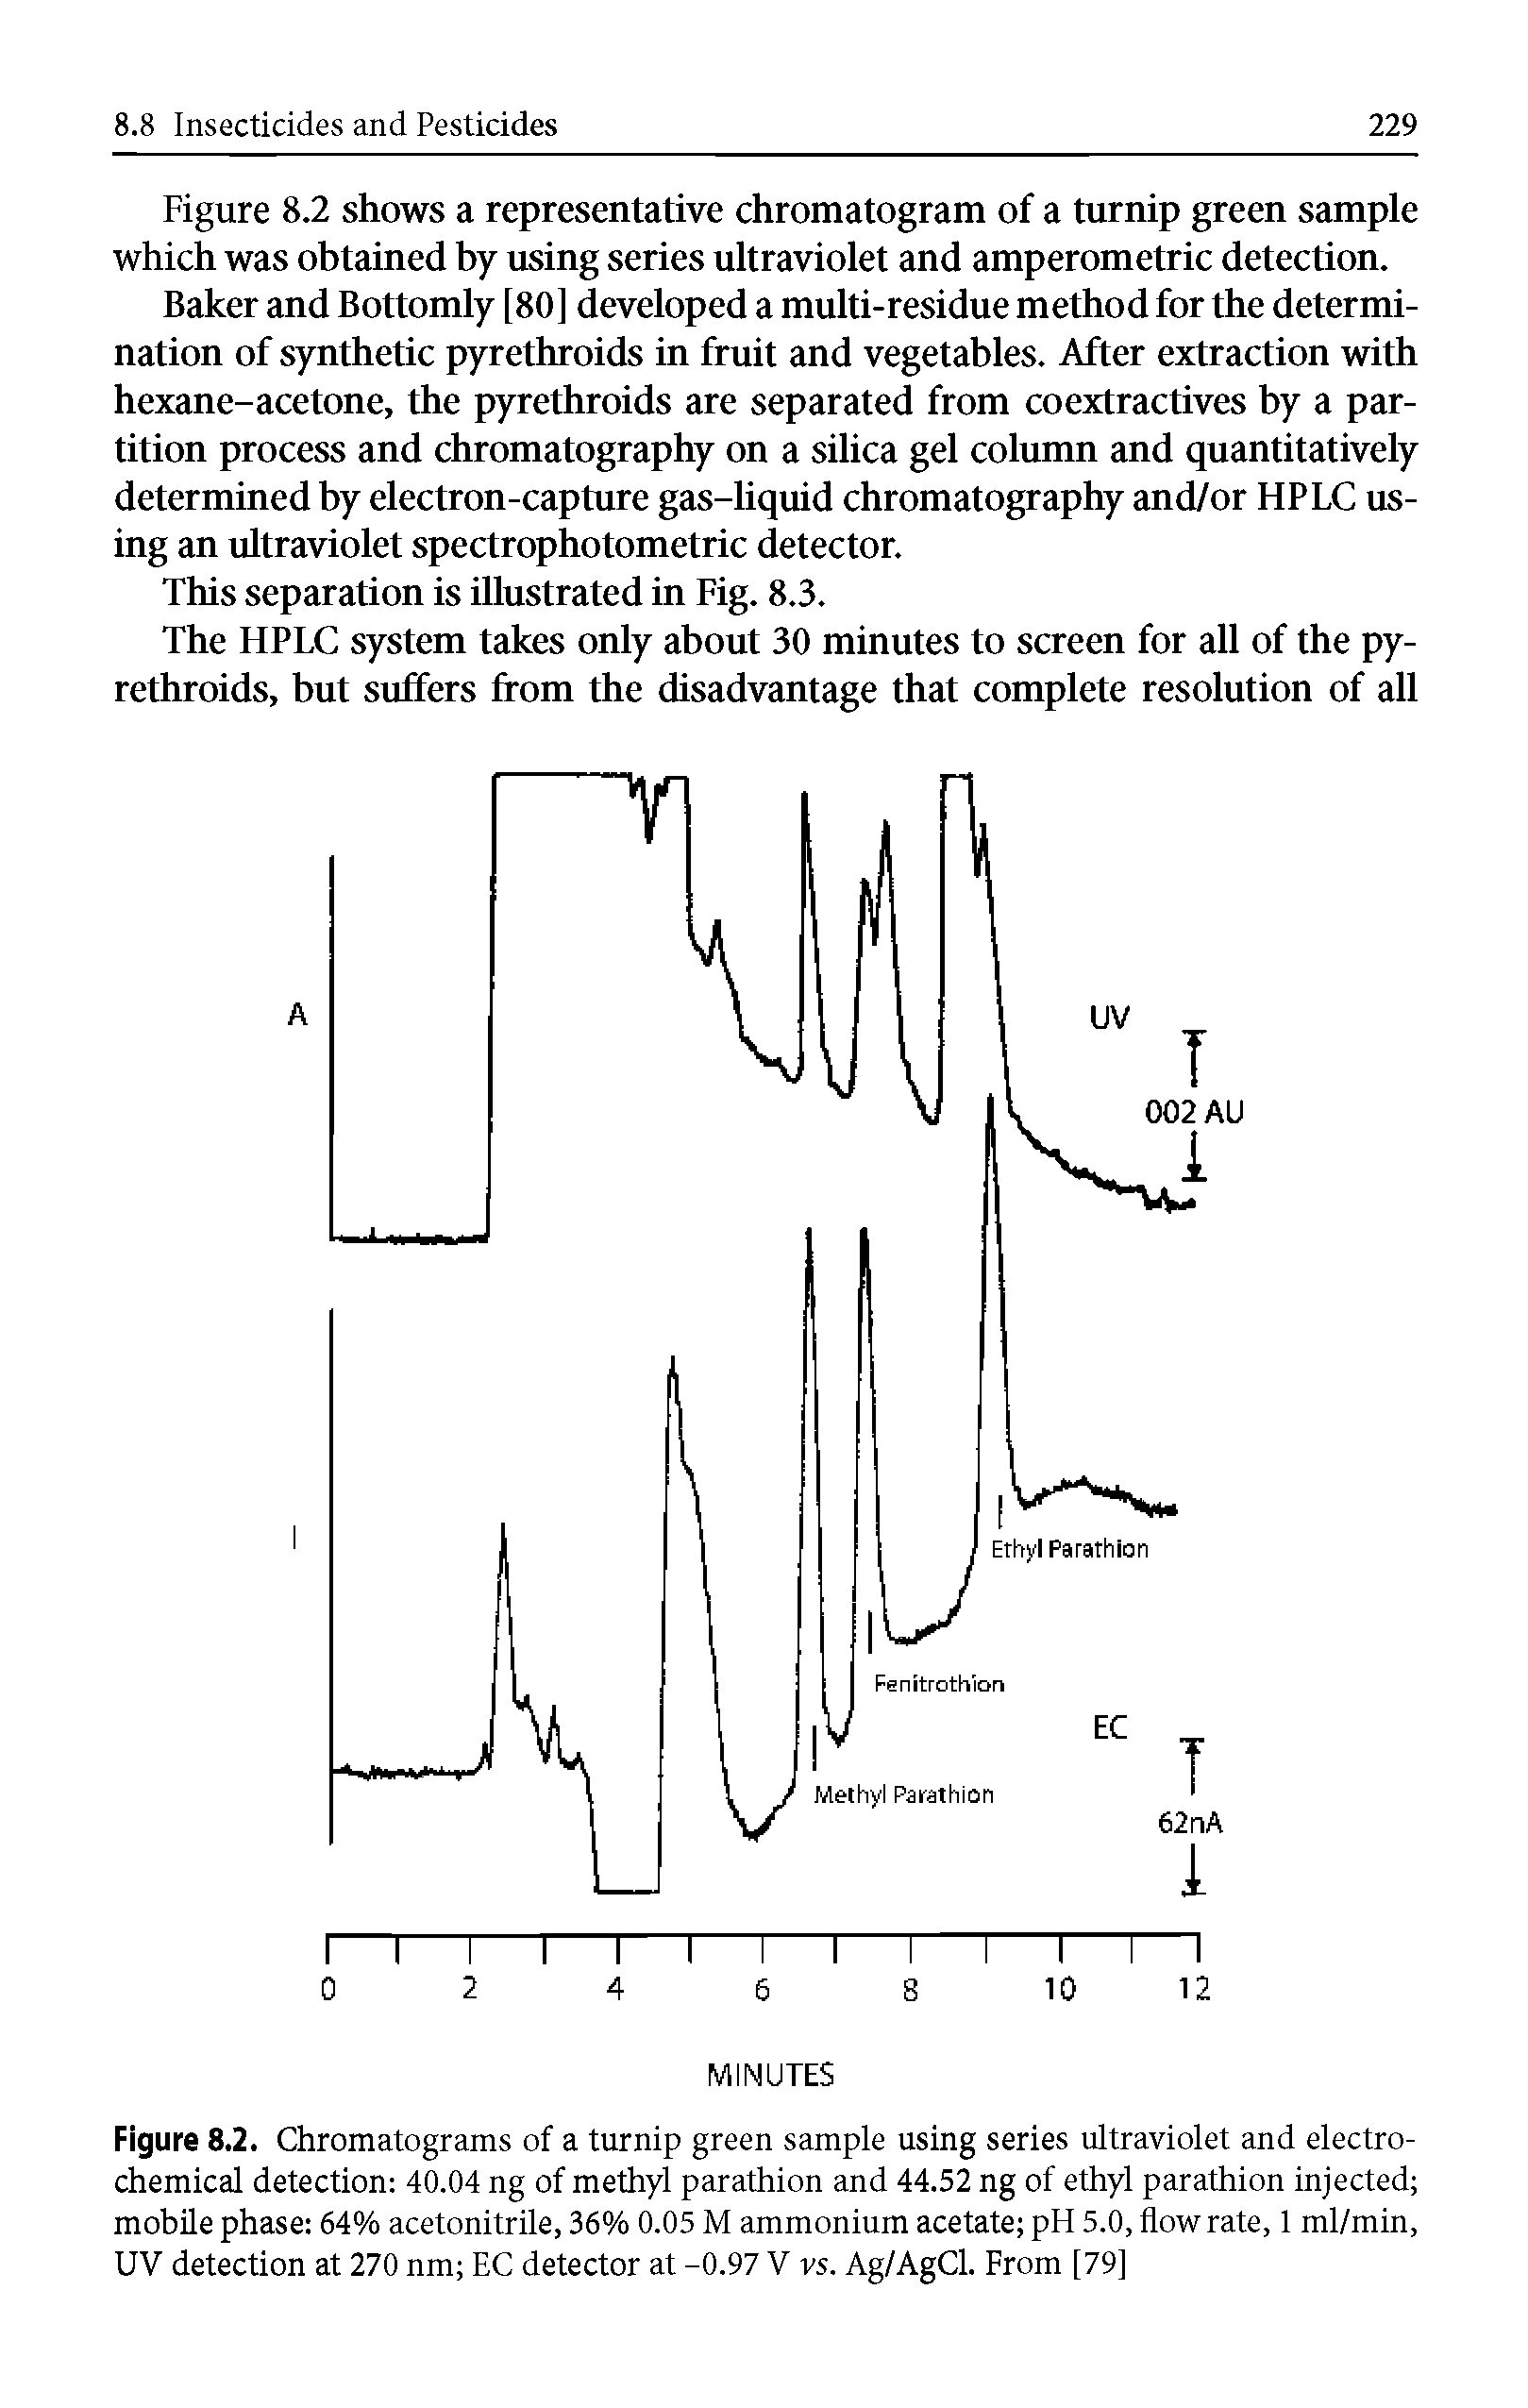 Figure 8.2. Chromatograms of a turnip green sample using series ultraviolet and electrochemical detection 40.04 ng of methyl parathion and 44.52 ng of ethyl parathion injected mobile phase 64% acetonitrile, 36% 0.05 M ammonium acetate pH 5.0, flowrate, 1 ml/min, UV detection at 270 nm EC detector at -0.97 V vs. Ag/AgCl. From [79]...